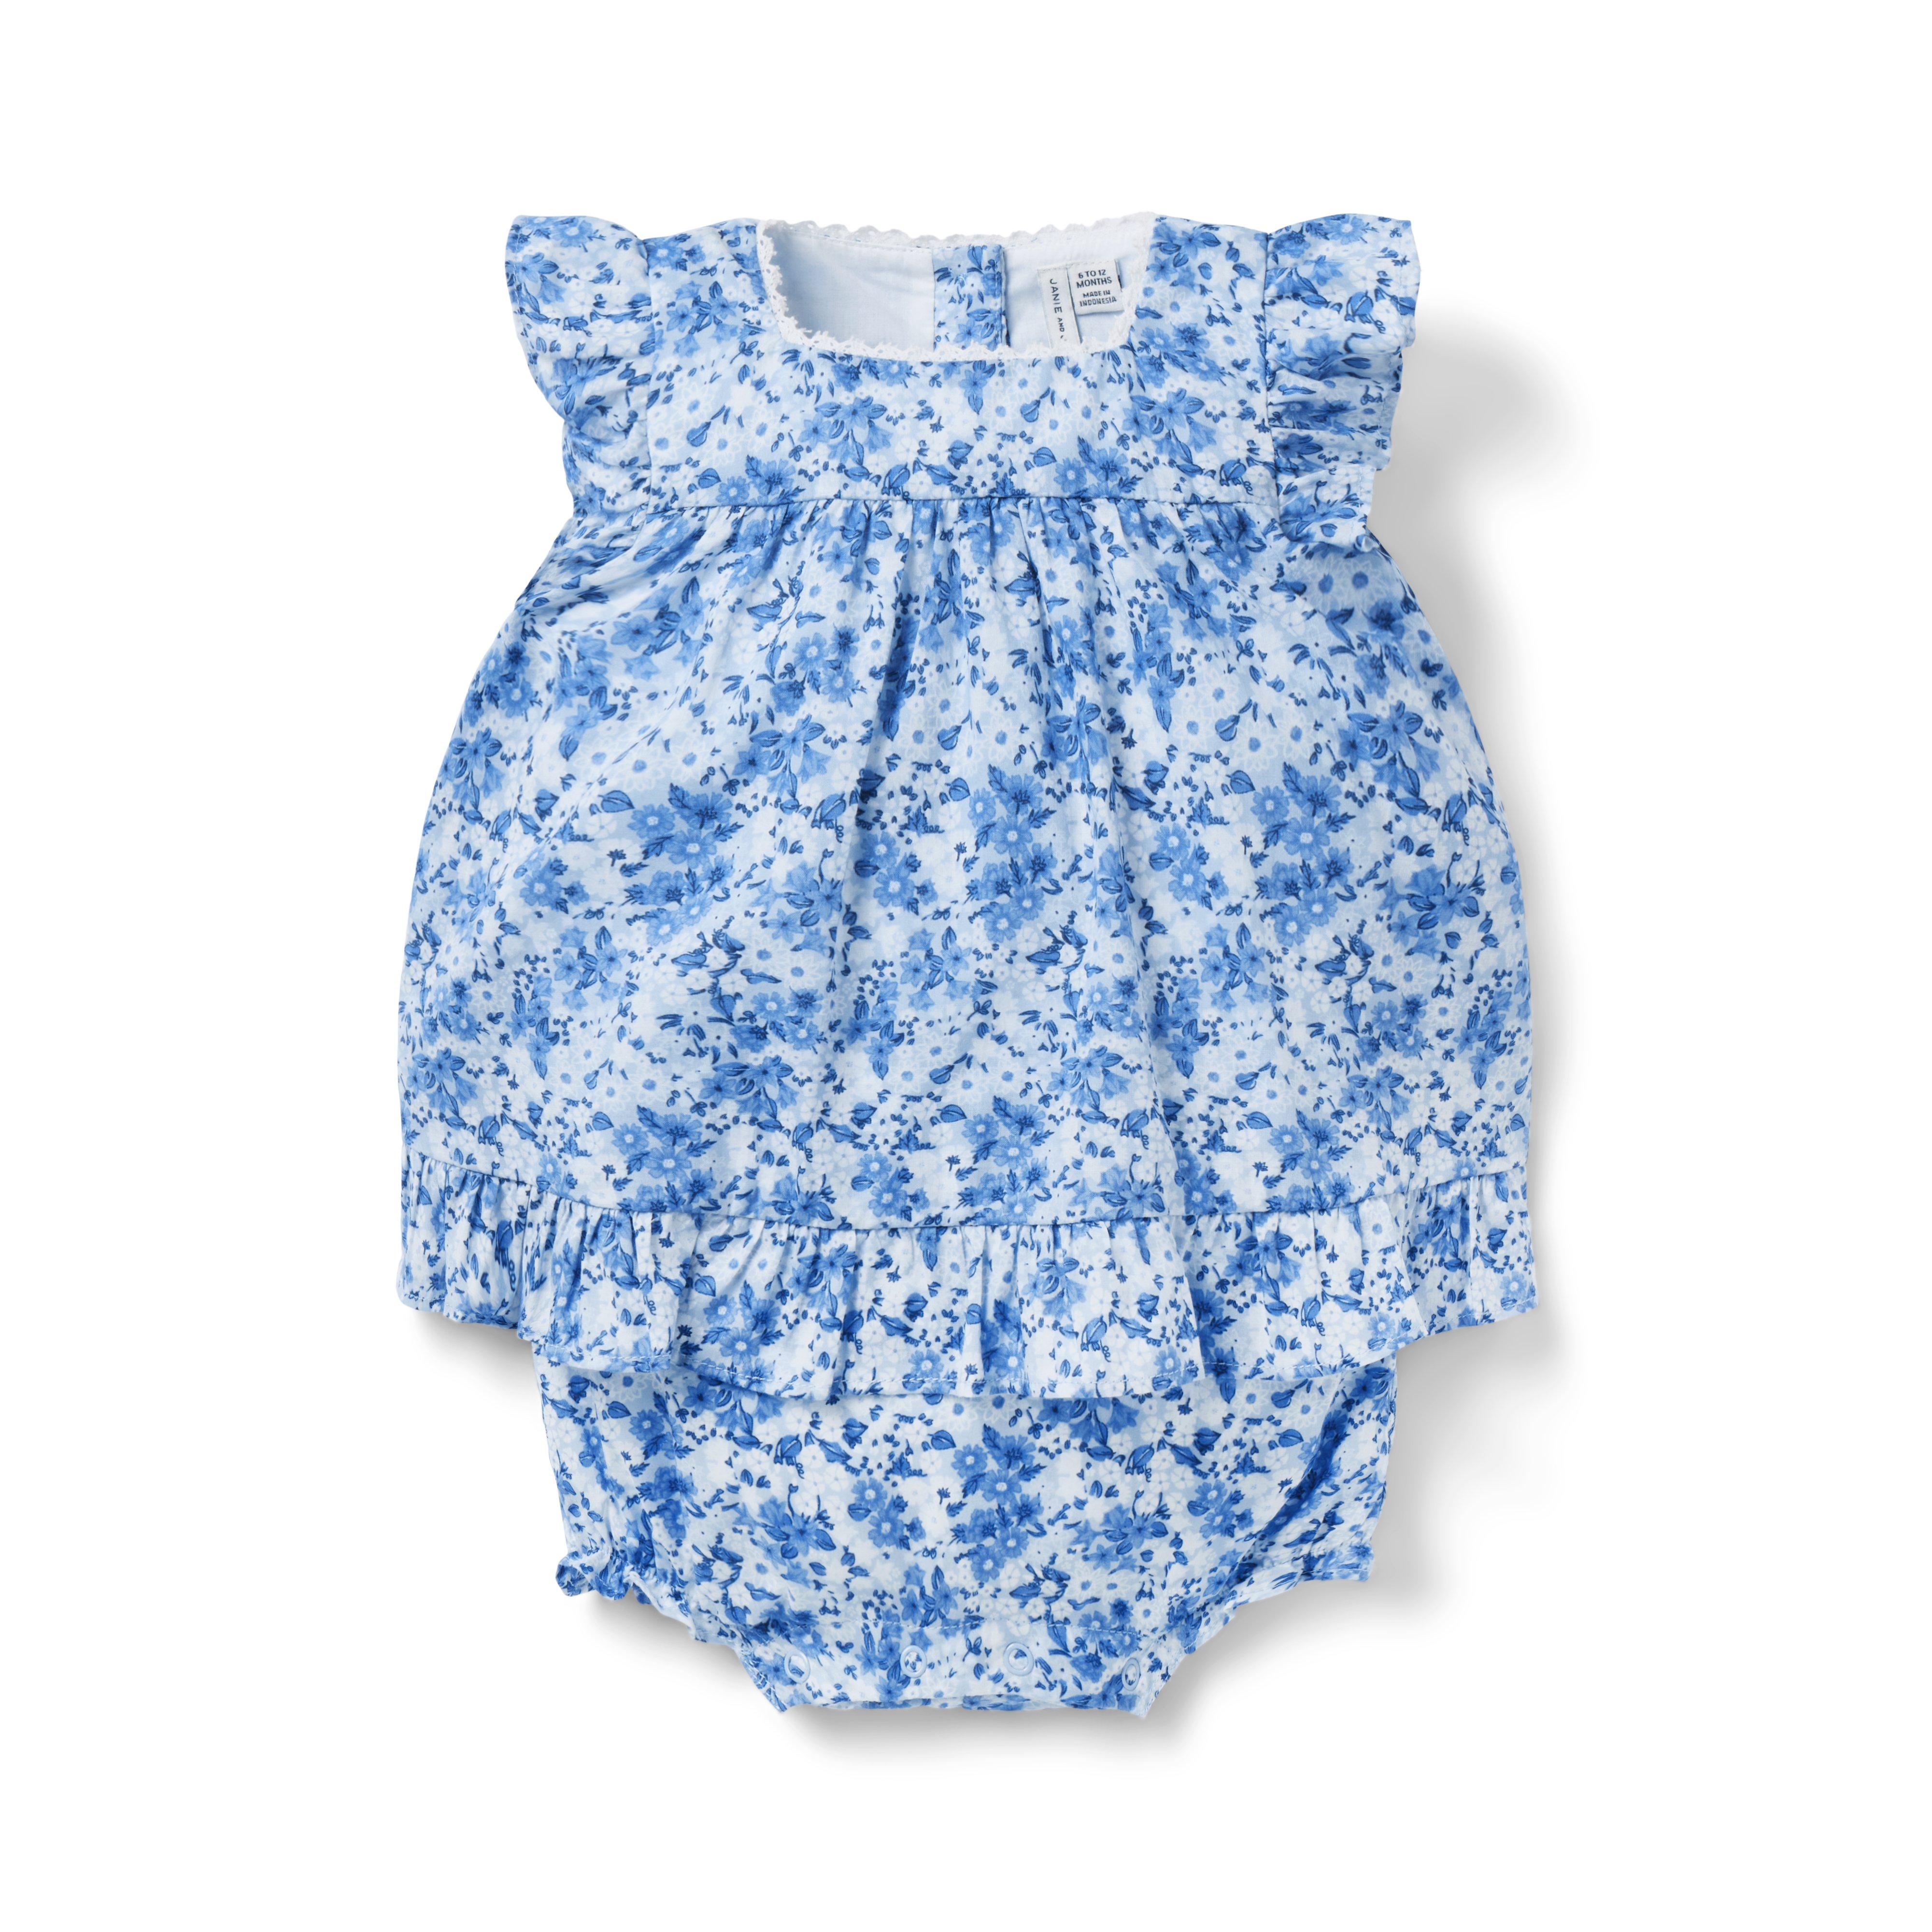 Baby Floral Ruffle Romper